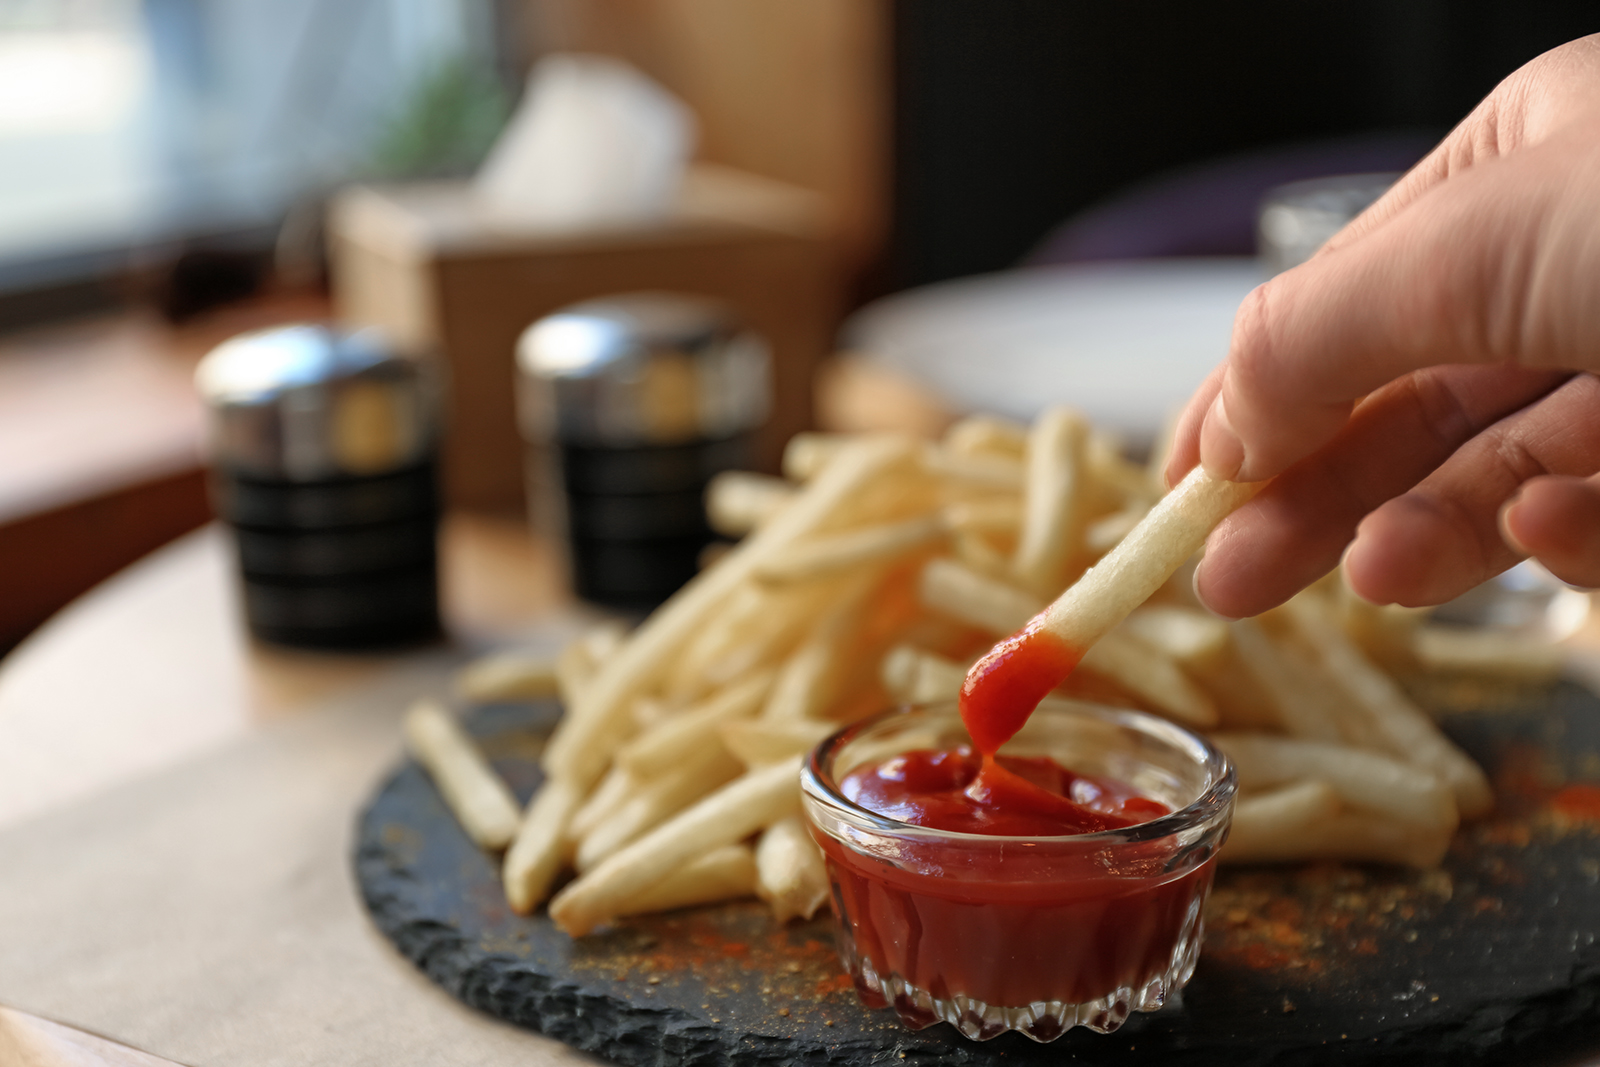 Dipping french fries into the ketchup. Photo: Shutterstock